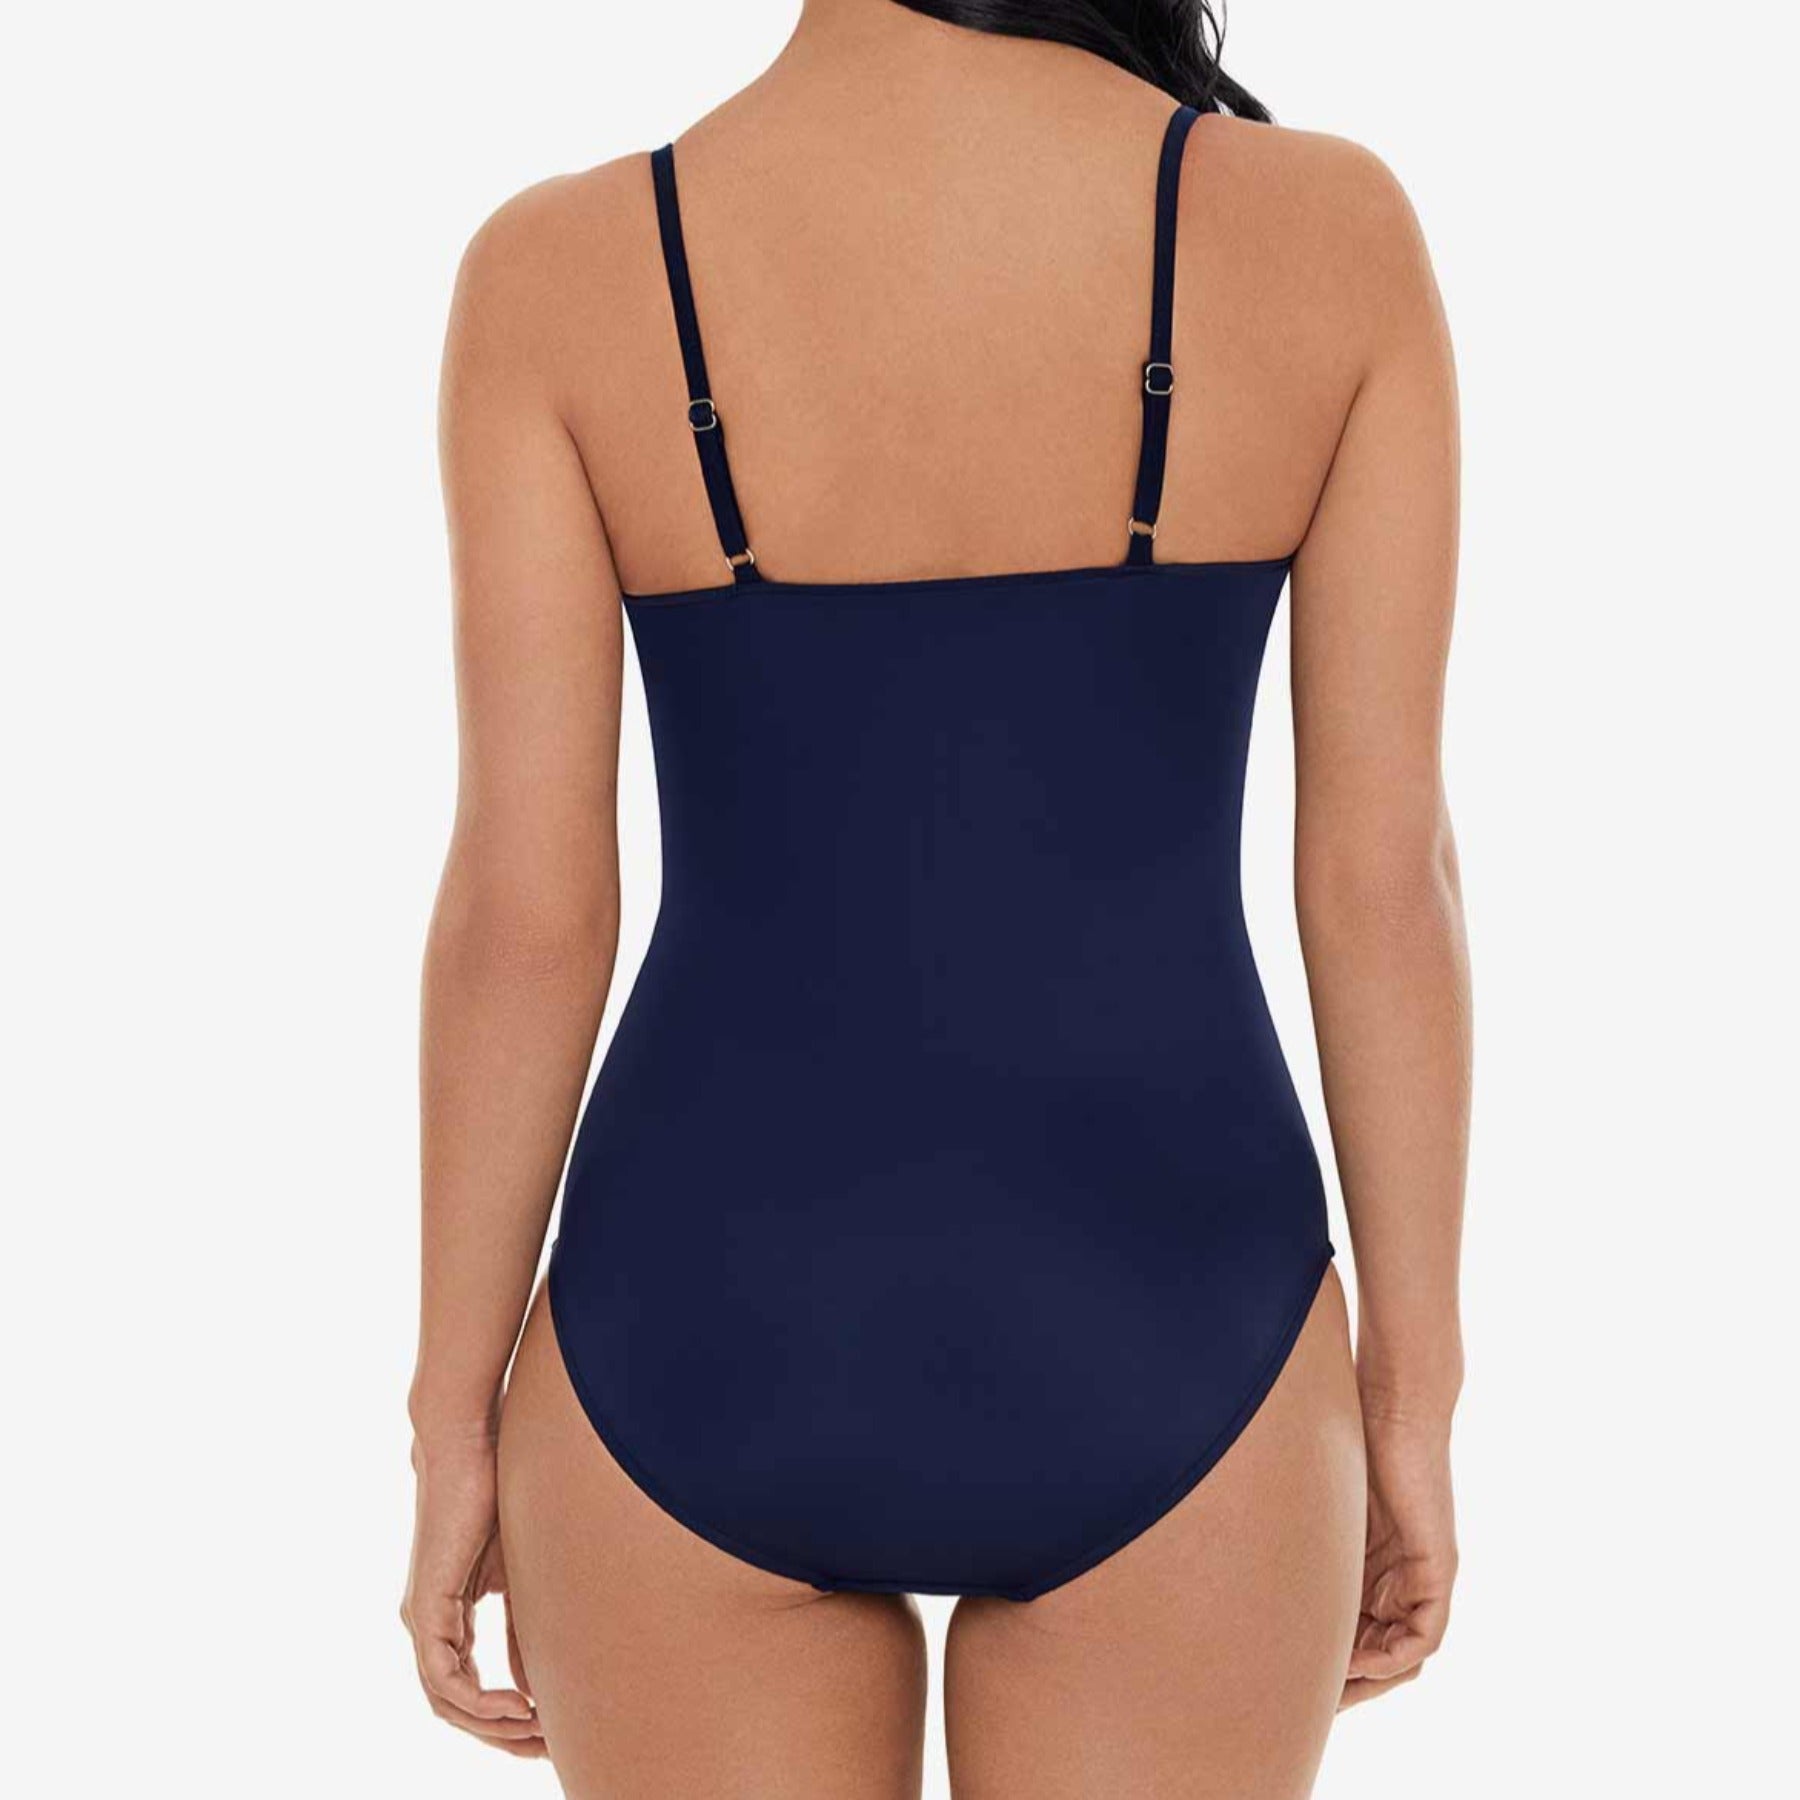 Isabel One Piece Swimsuit 6006018 - Navy Blue